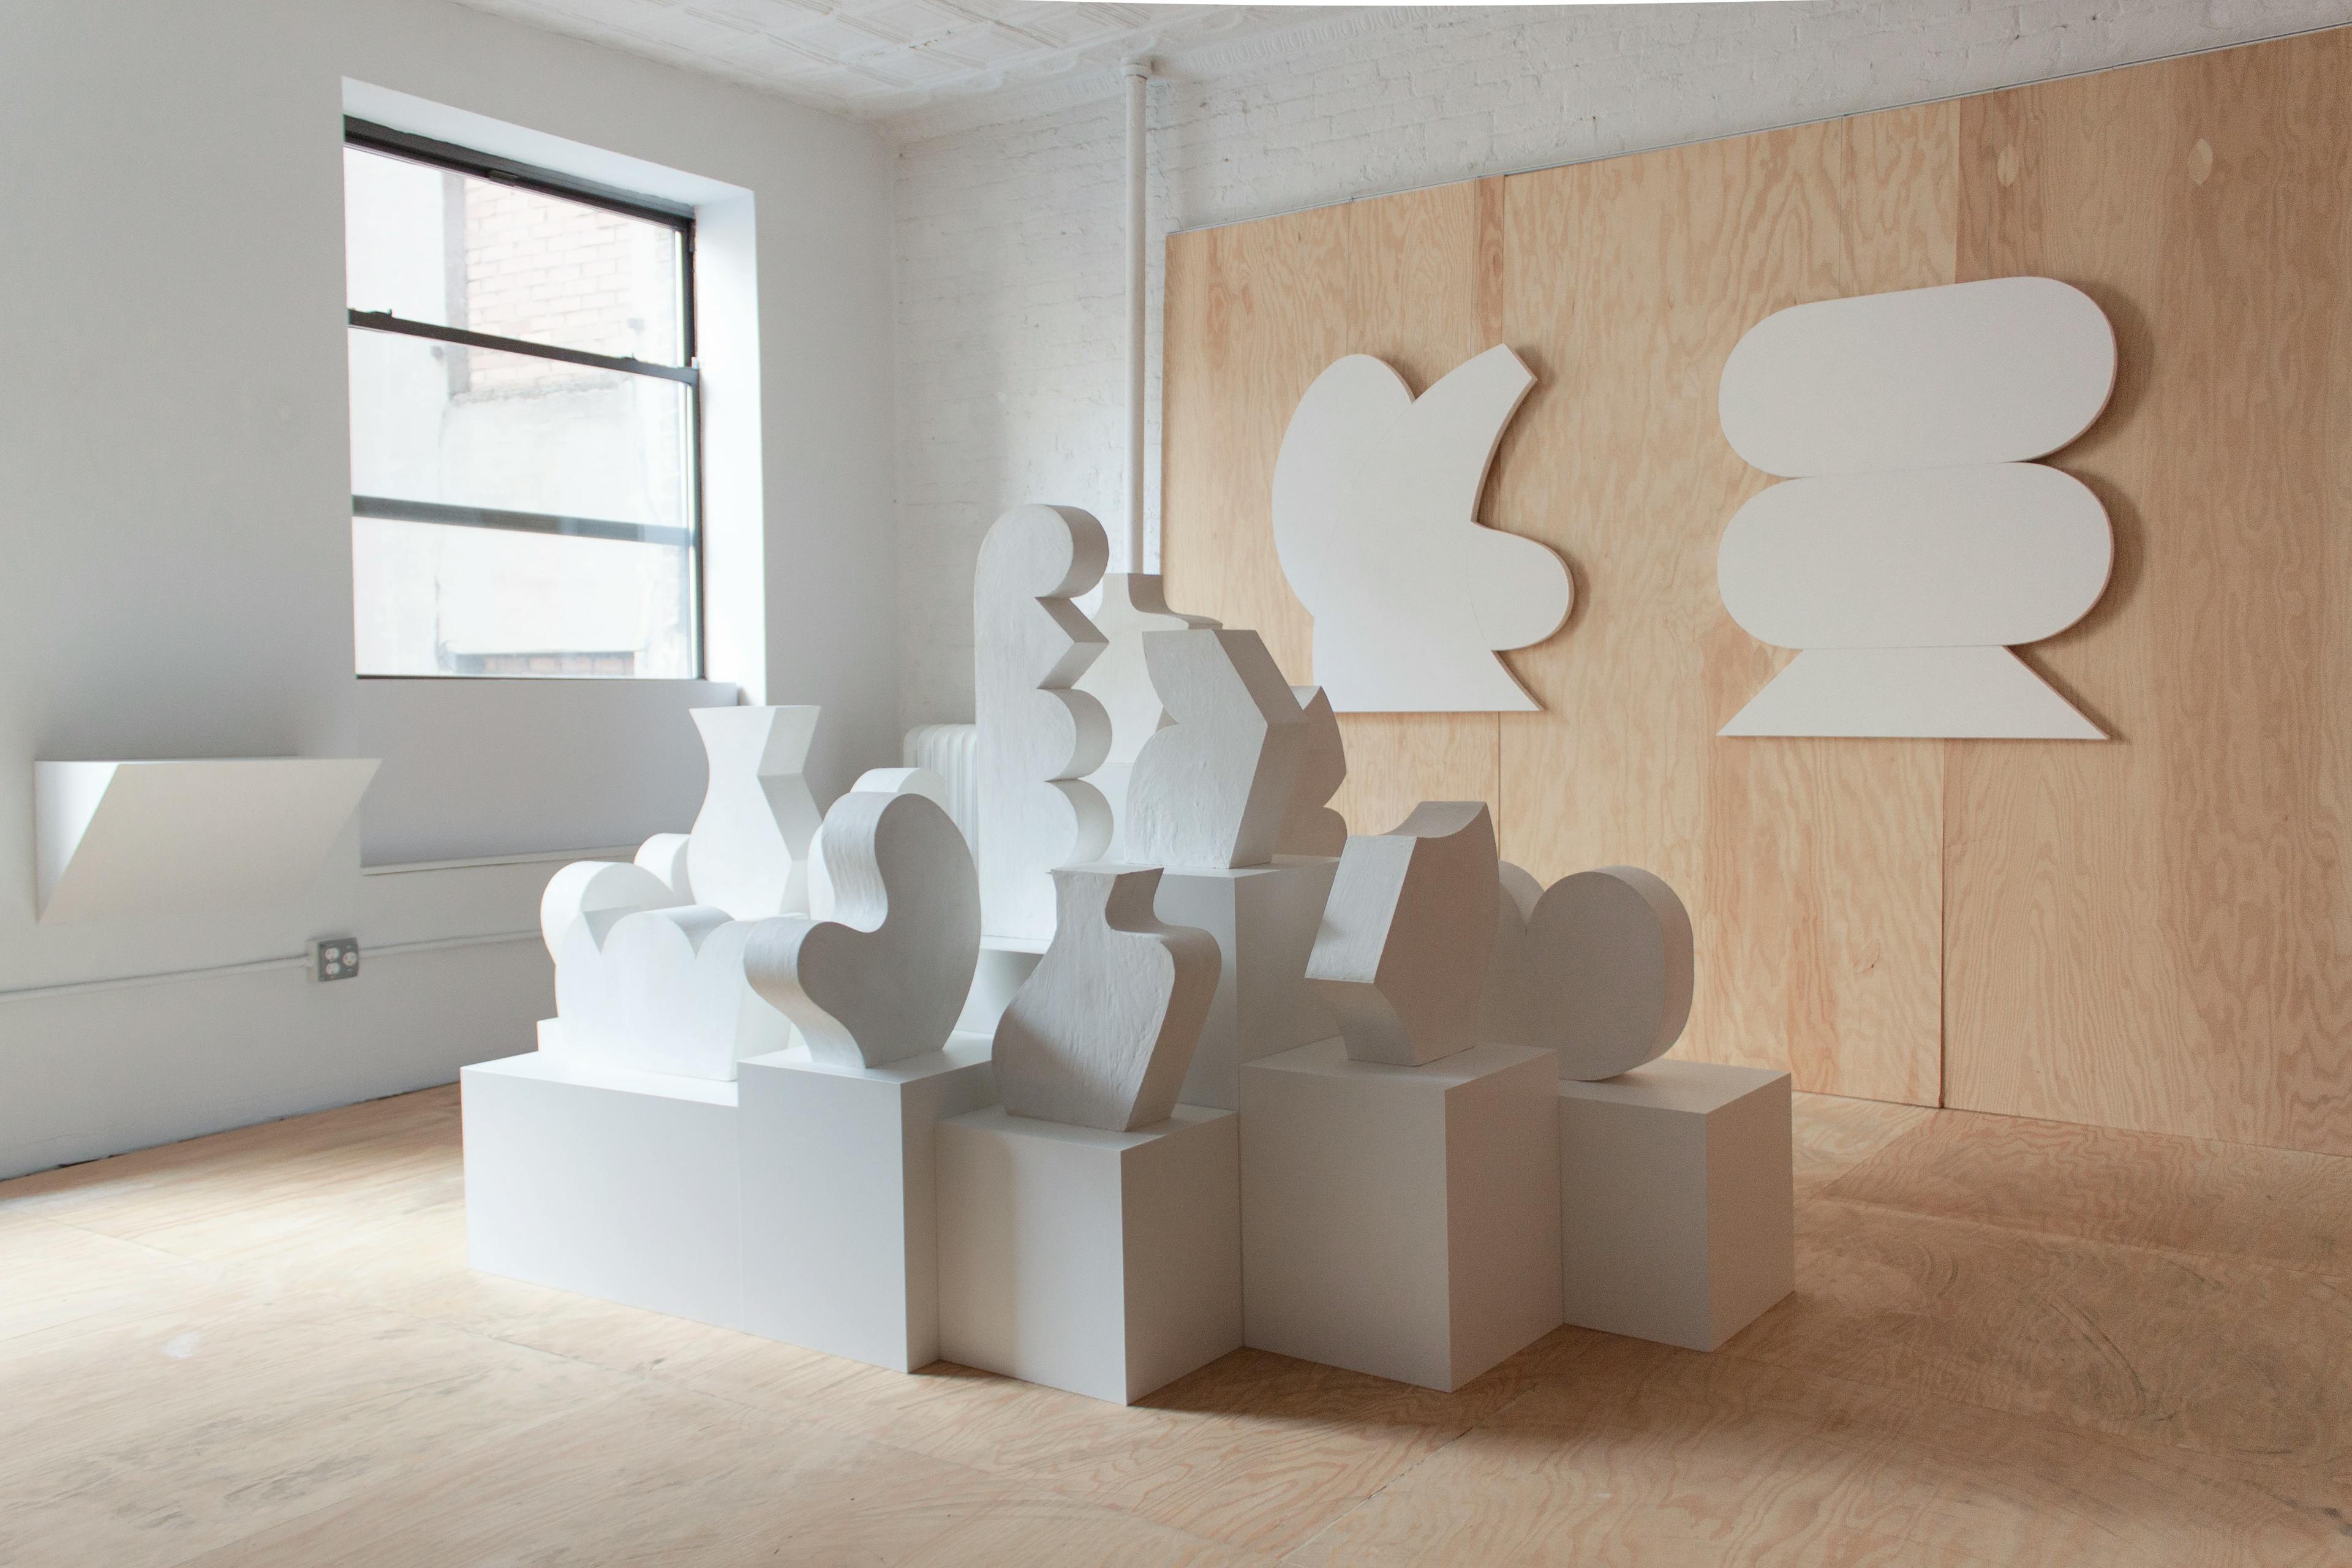 Artwork installed as part of You and Me, one of Uprise Art's Exhibitions in New York, NY.